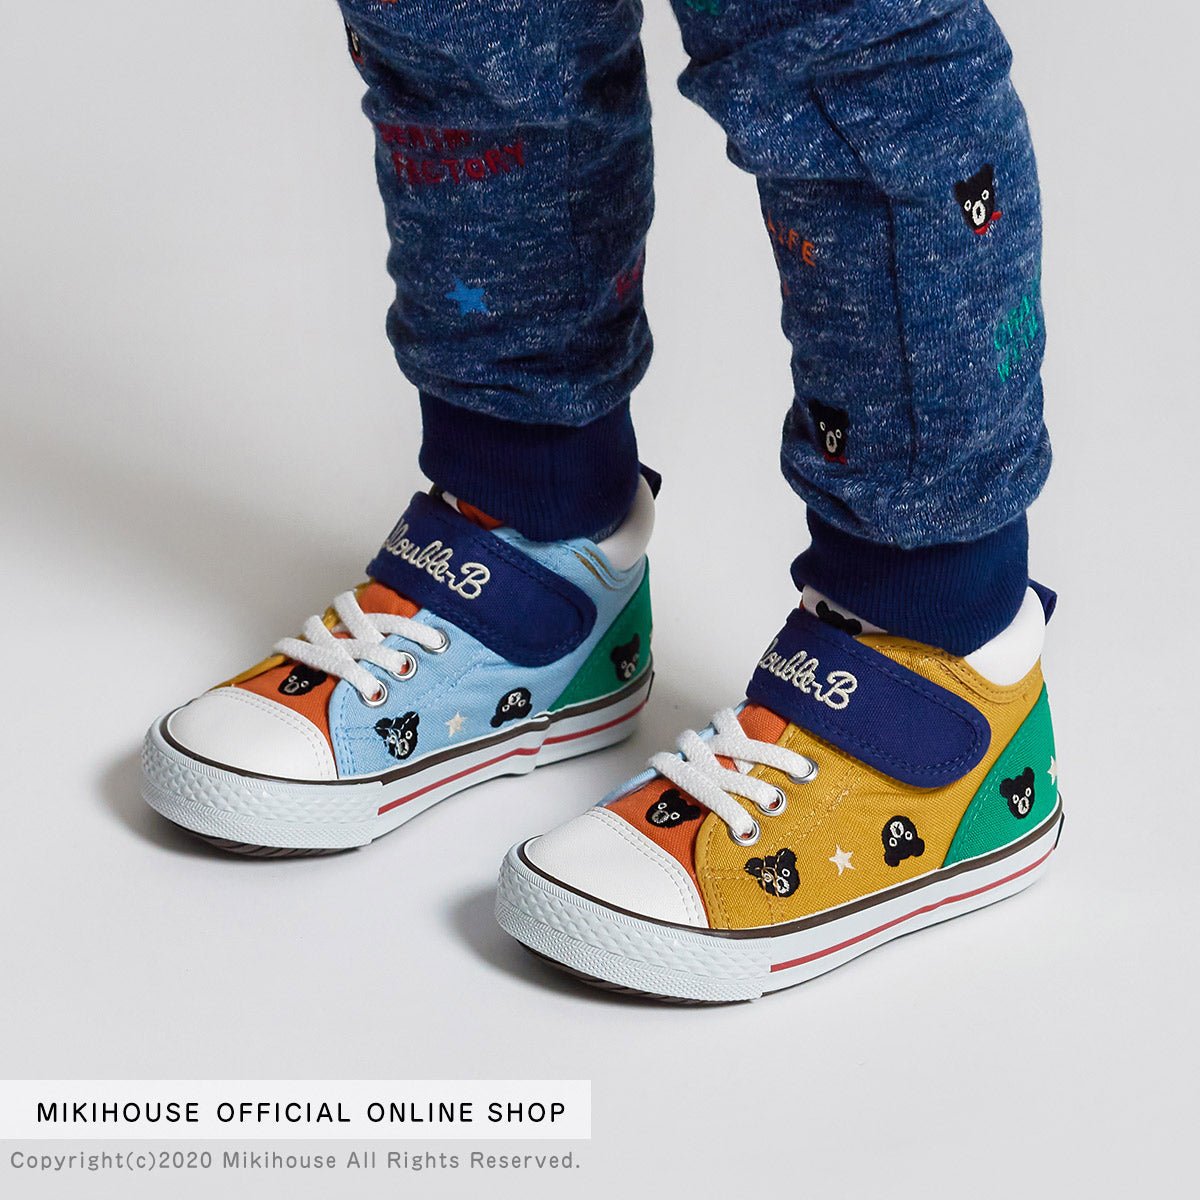 DOUBLE_B High Top Sneakers for Kids- B-kun and Stars Embroidery - 63-9402-820-87-16